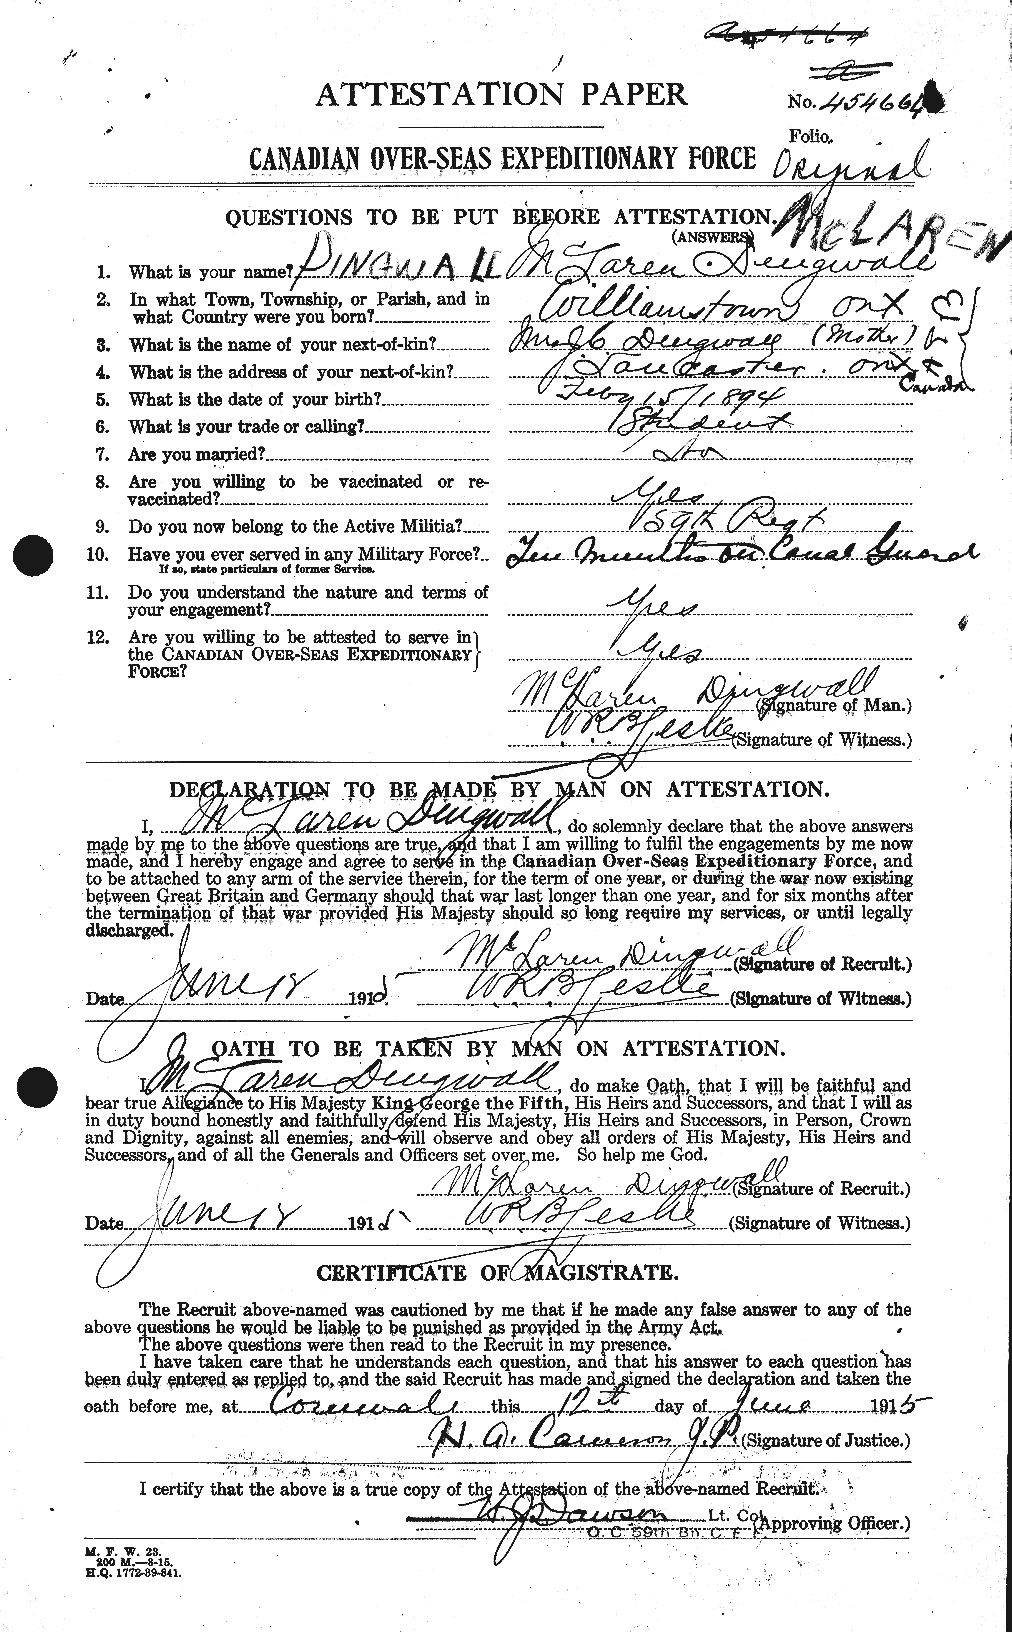 Personnel Records of the First World War - CEF 292310a